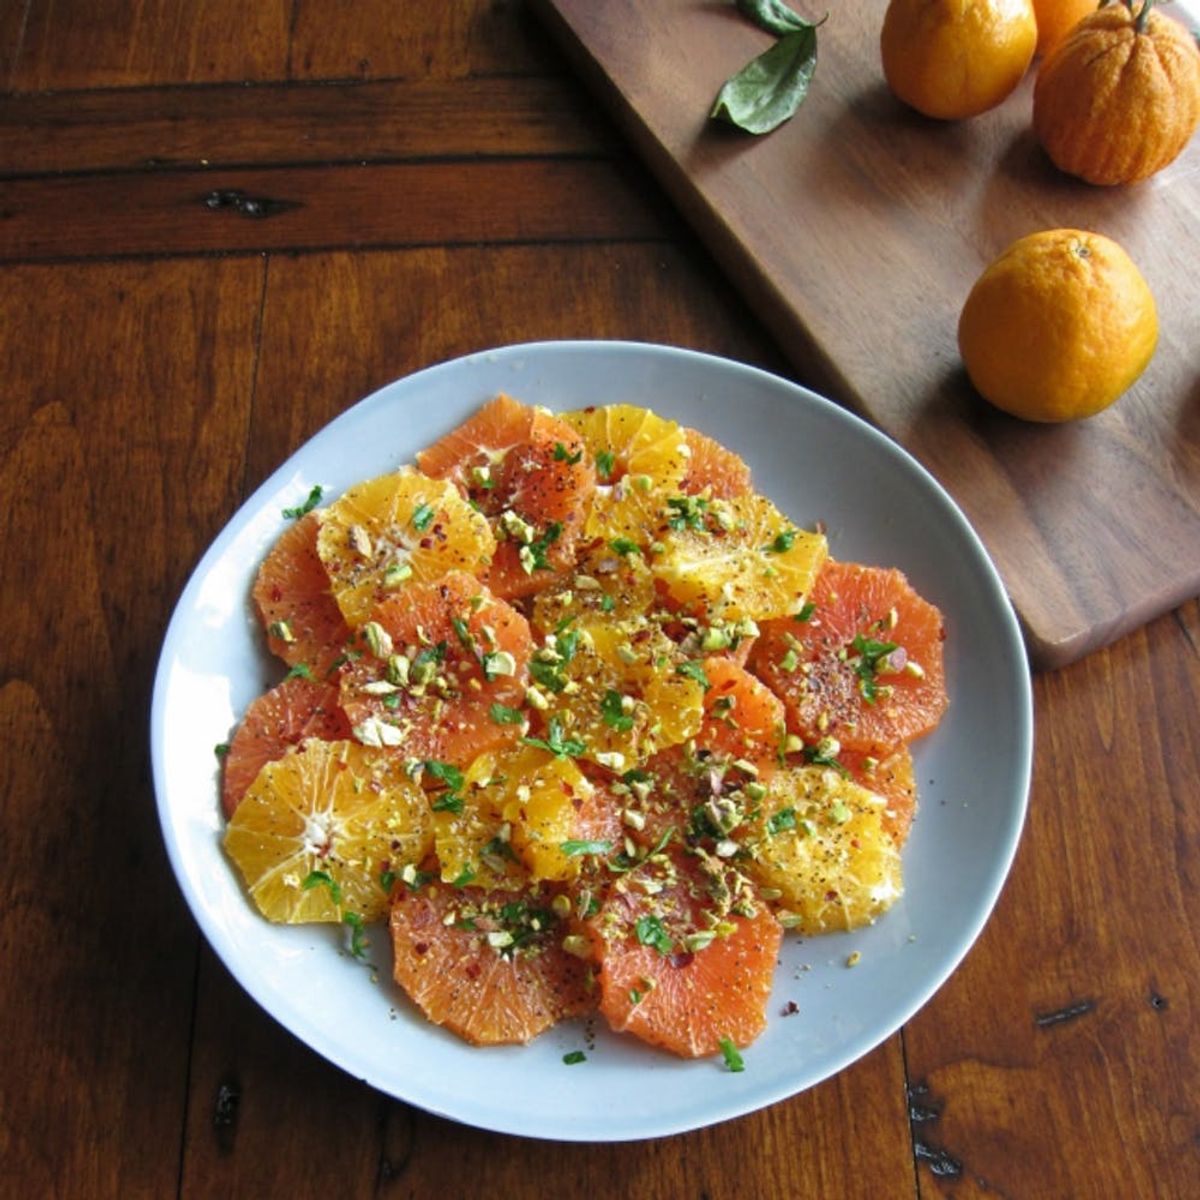 16 Winter Citrus Salad Recipes to Toss Up Now